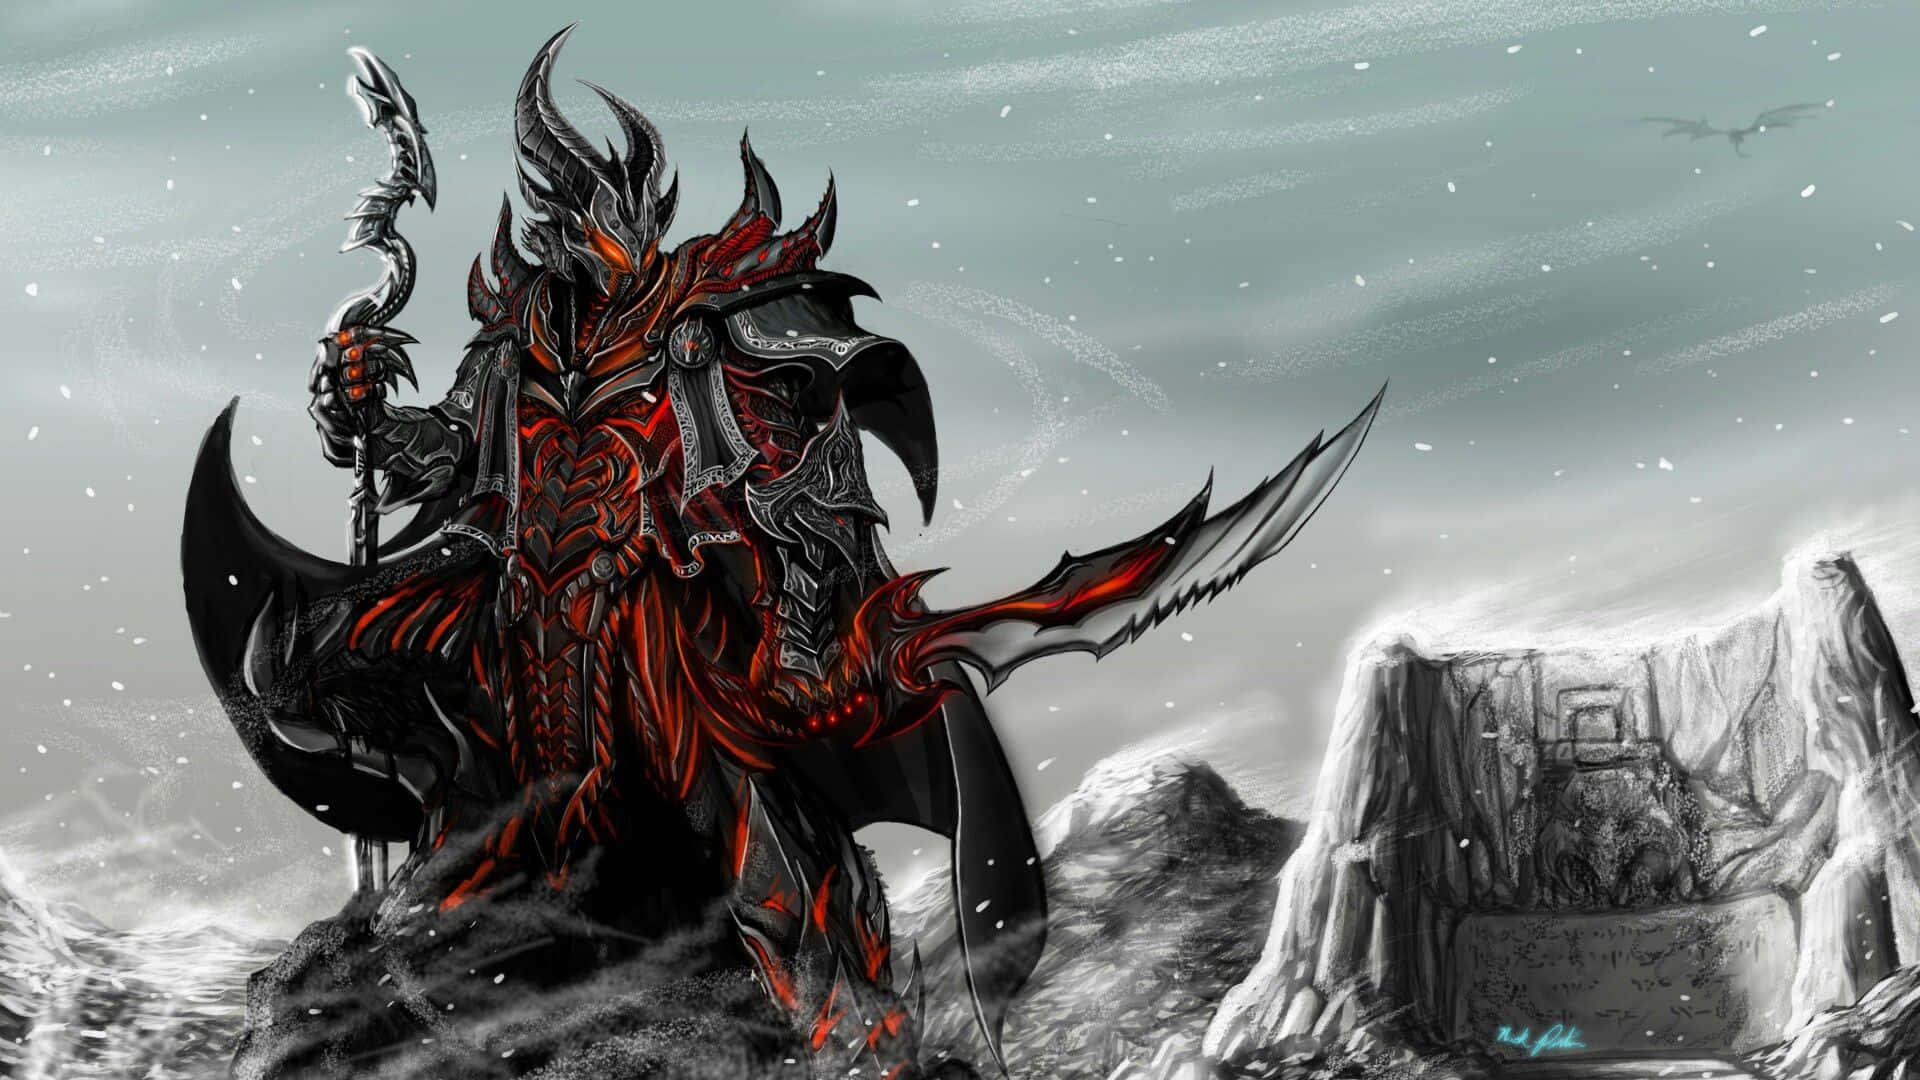 The Daedric Warrior standing tall in the world of Skyrim. Wallpaper